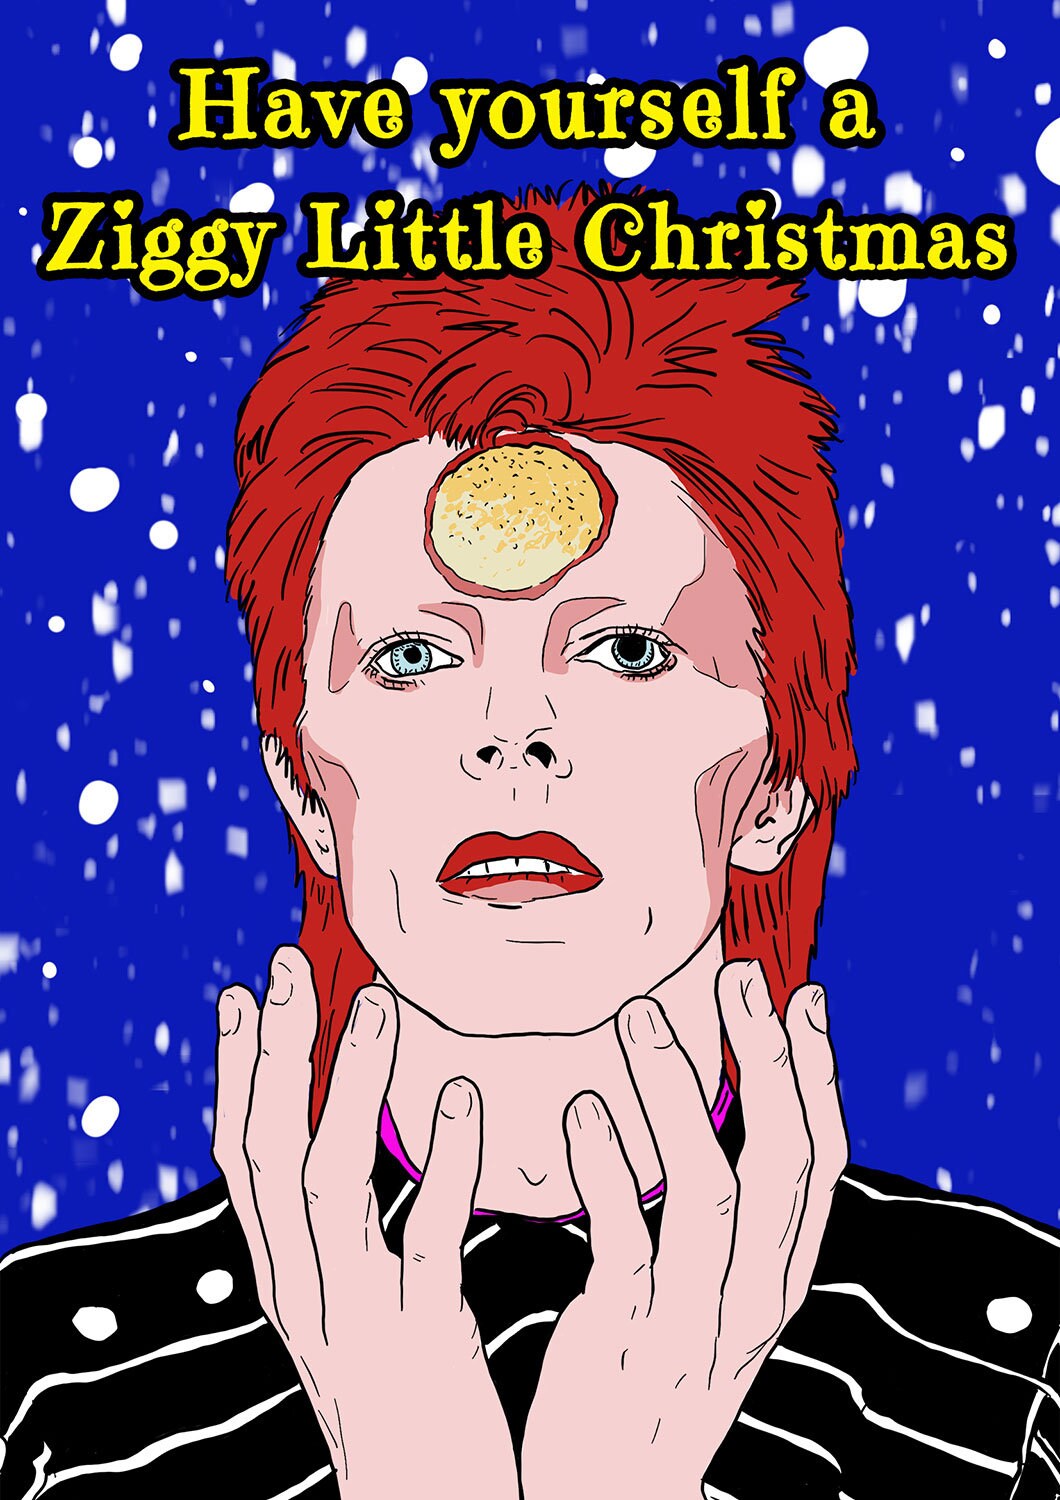 David Bowie Christmas card, gift for David Bowie fan, greeting card for music fans, music Christmas gift, Ziggy Stardust Christmas card